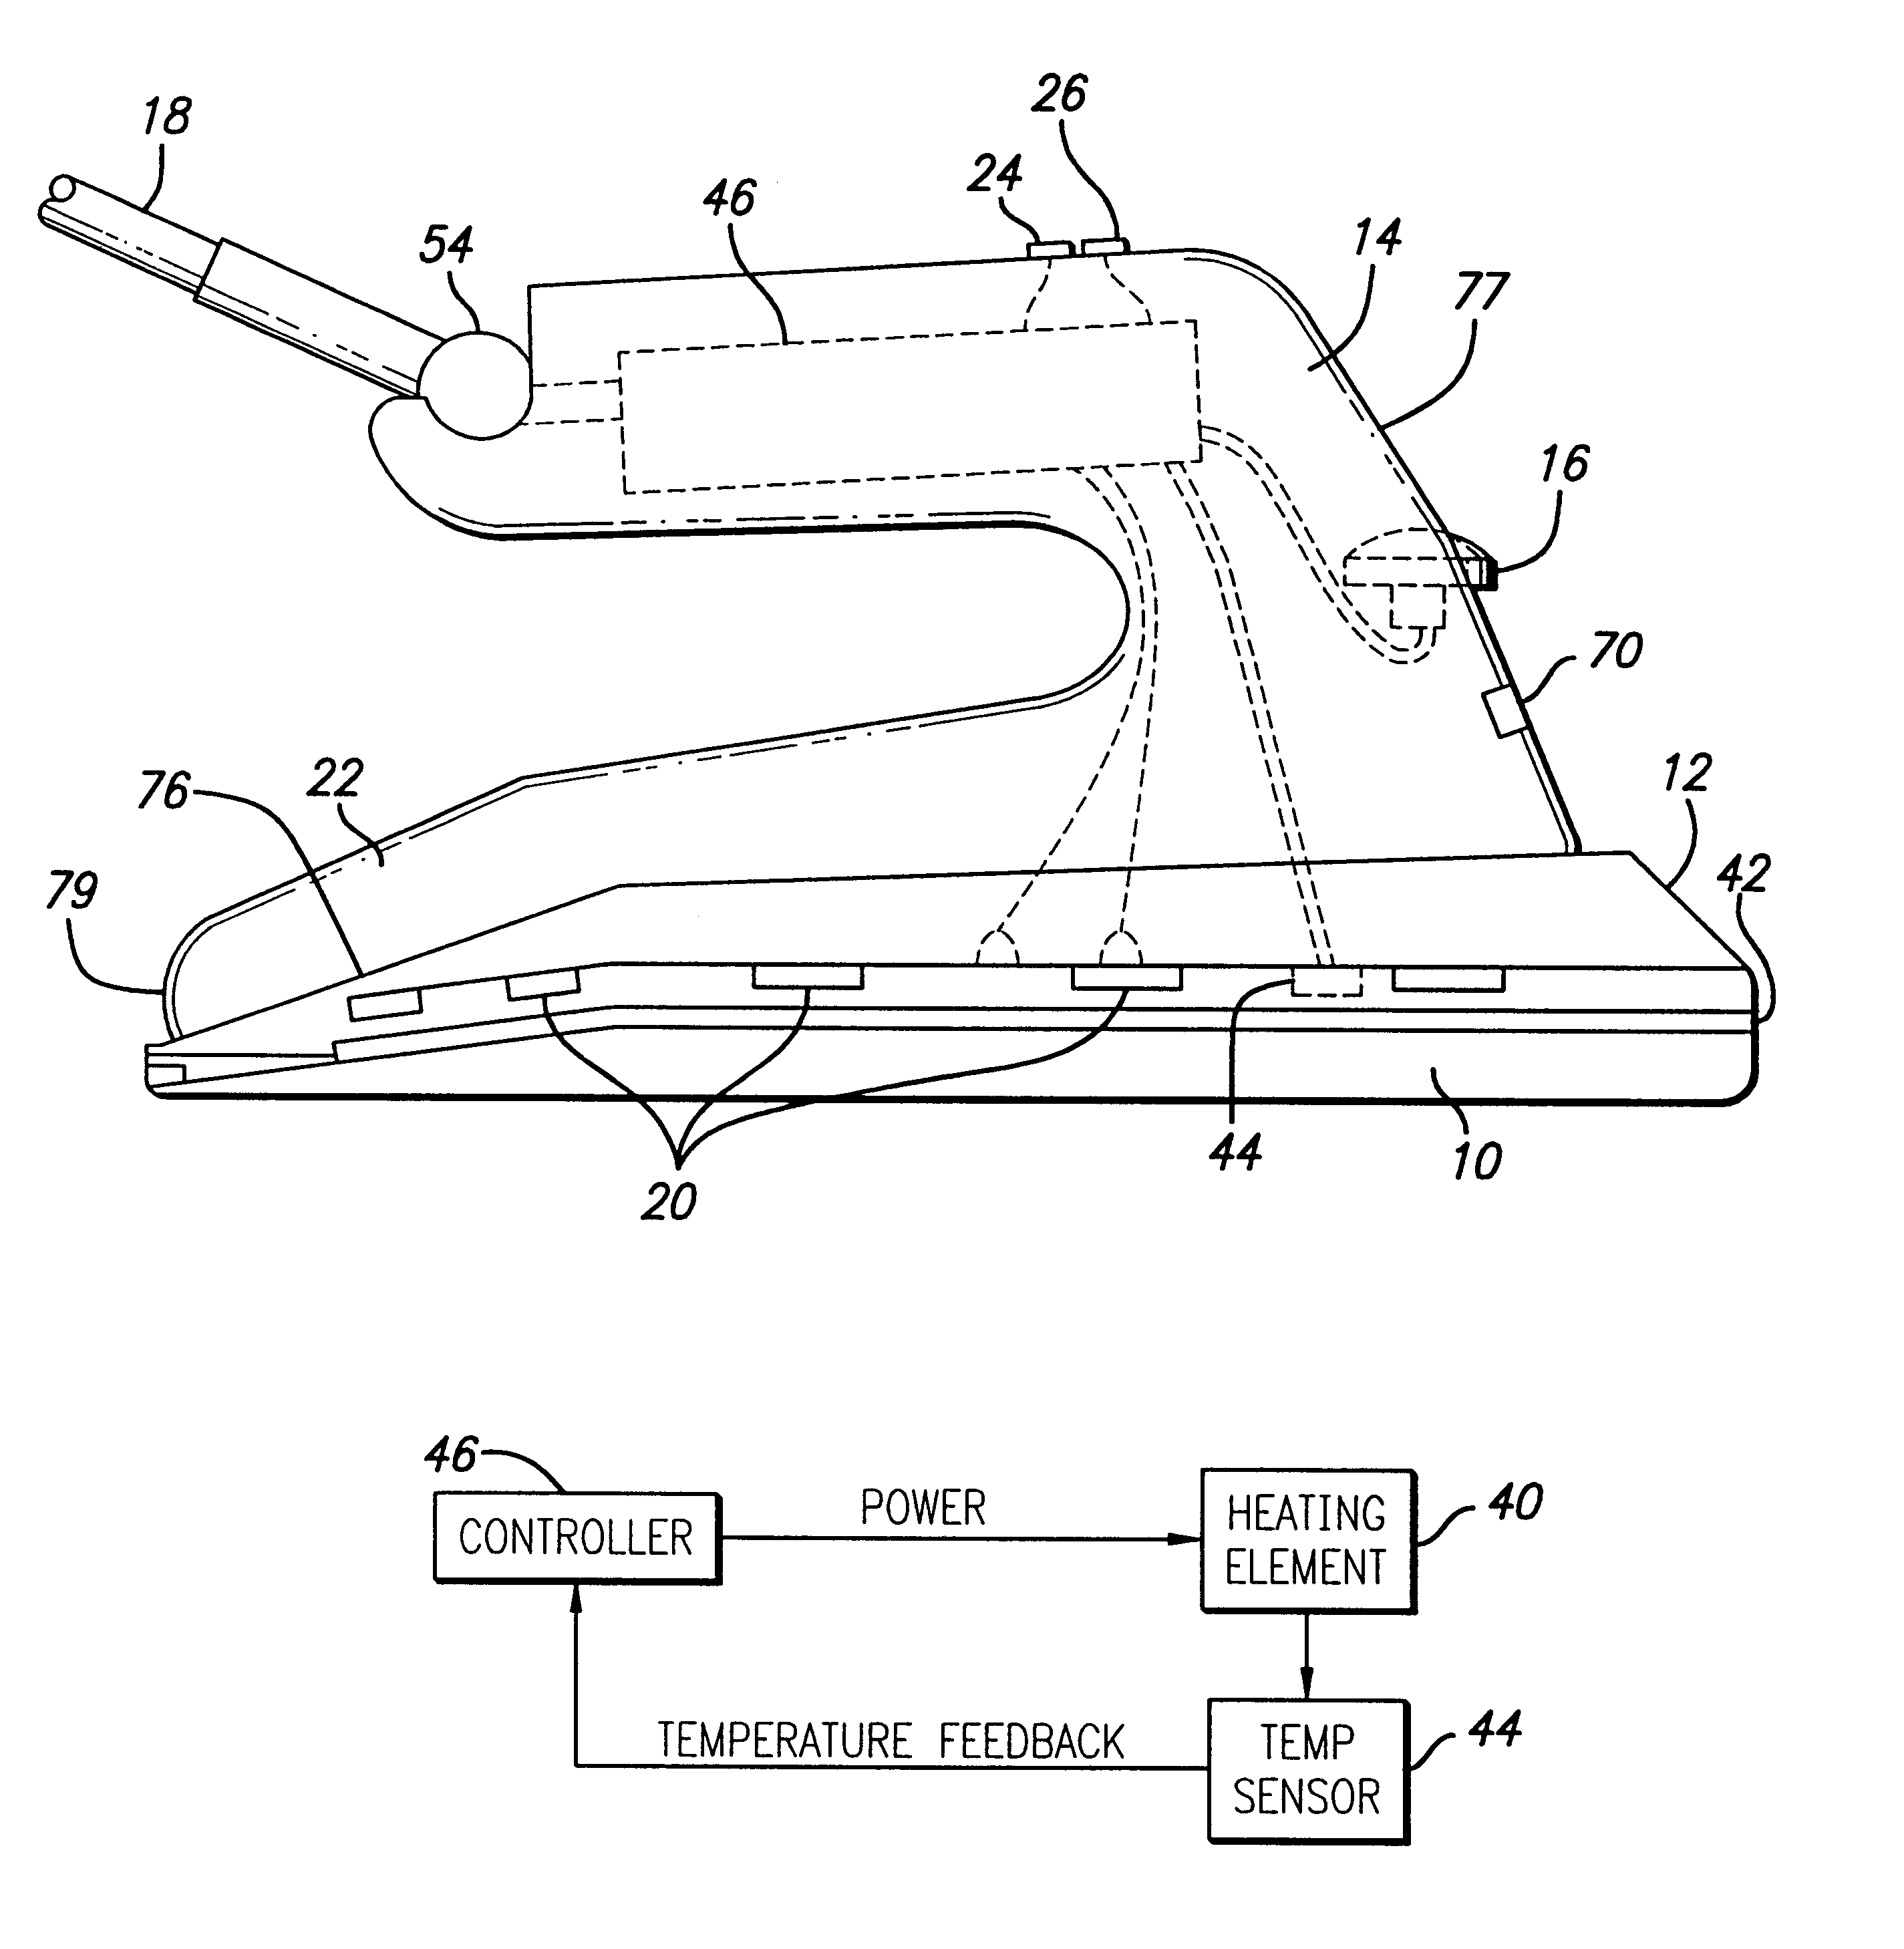 Carpet seaming iron with electronic temperature control